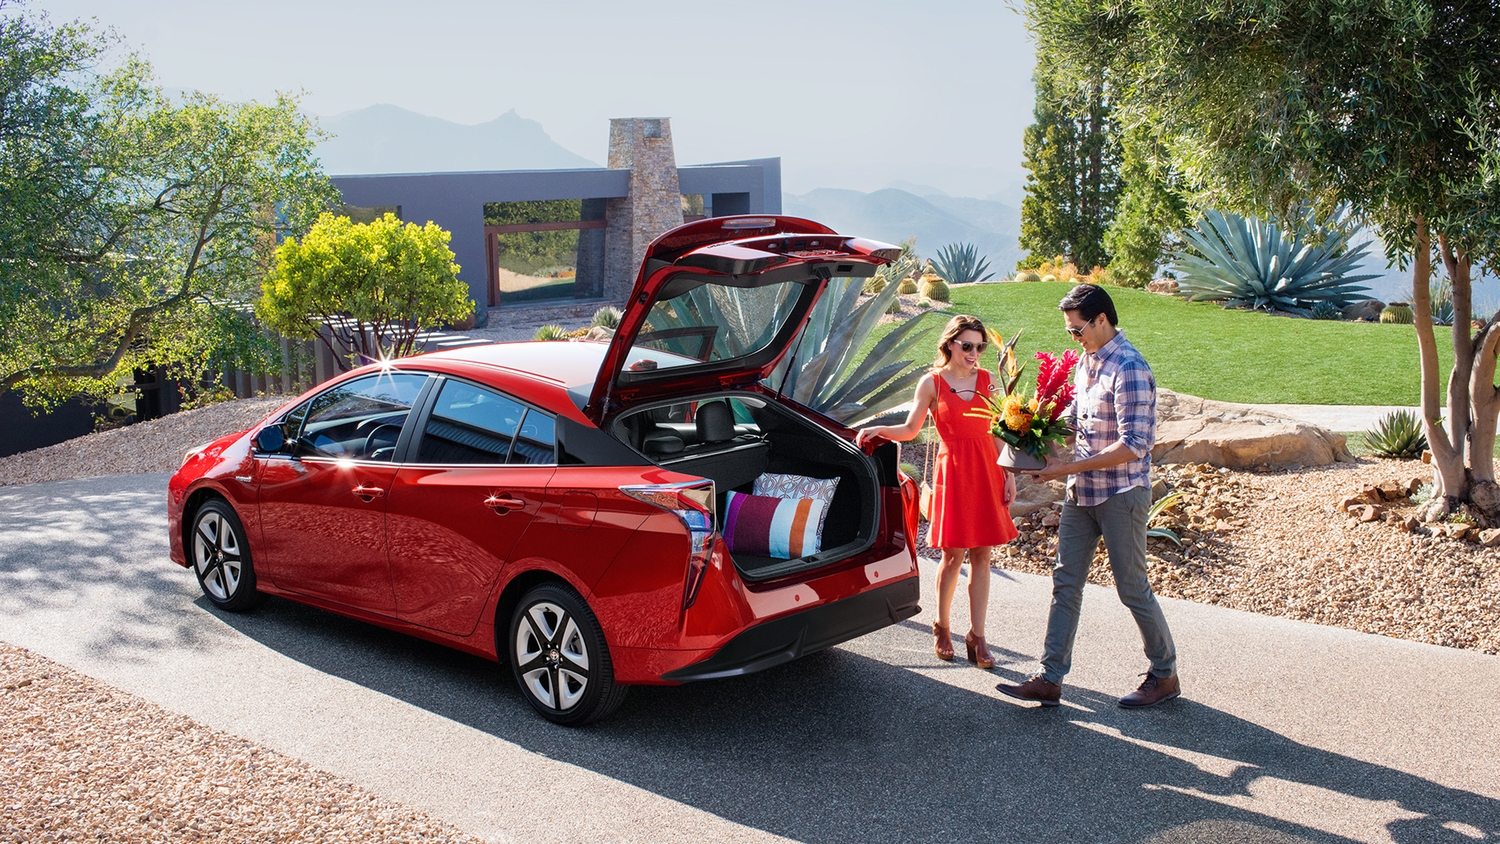 Image of a couple with sunglasses putting a pot of flowers into the trunk of a red Toyota Prius.